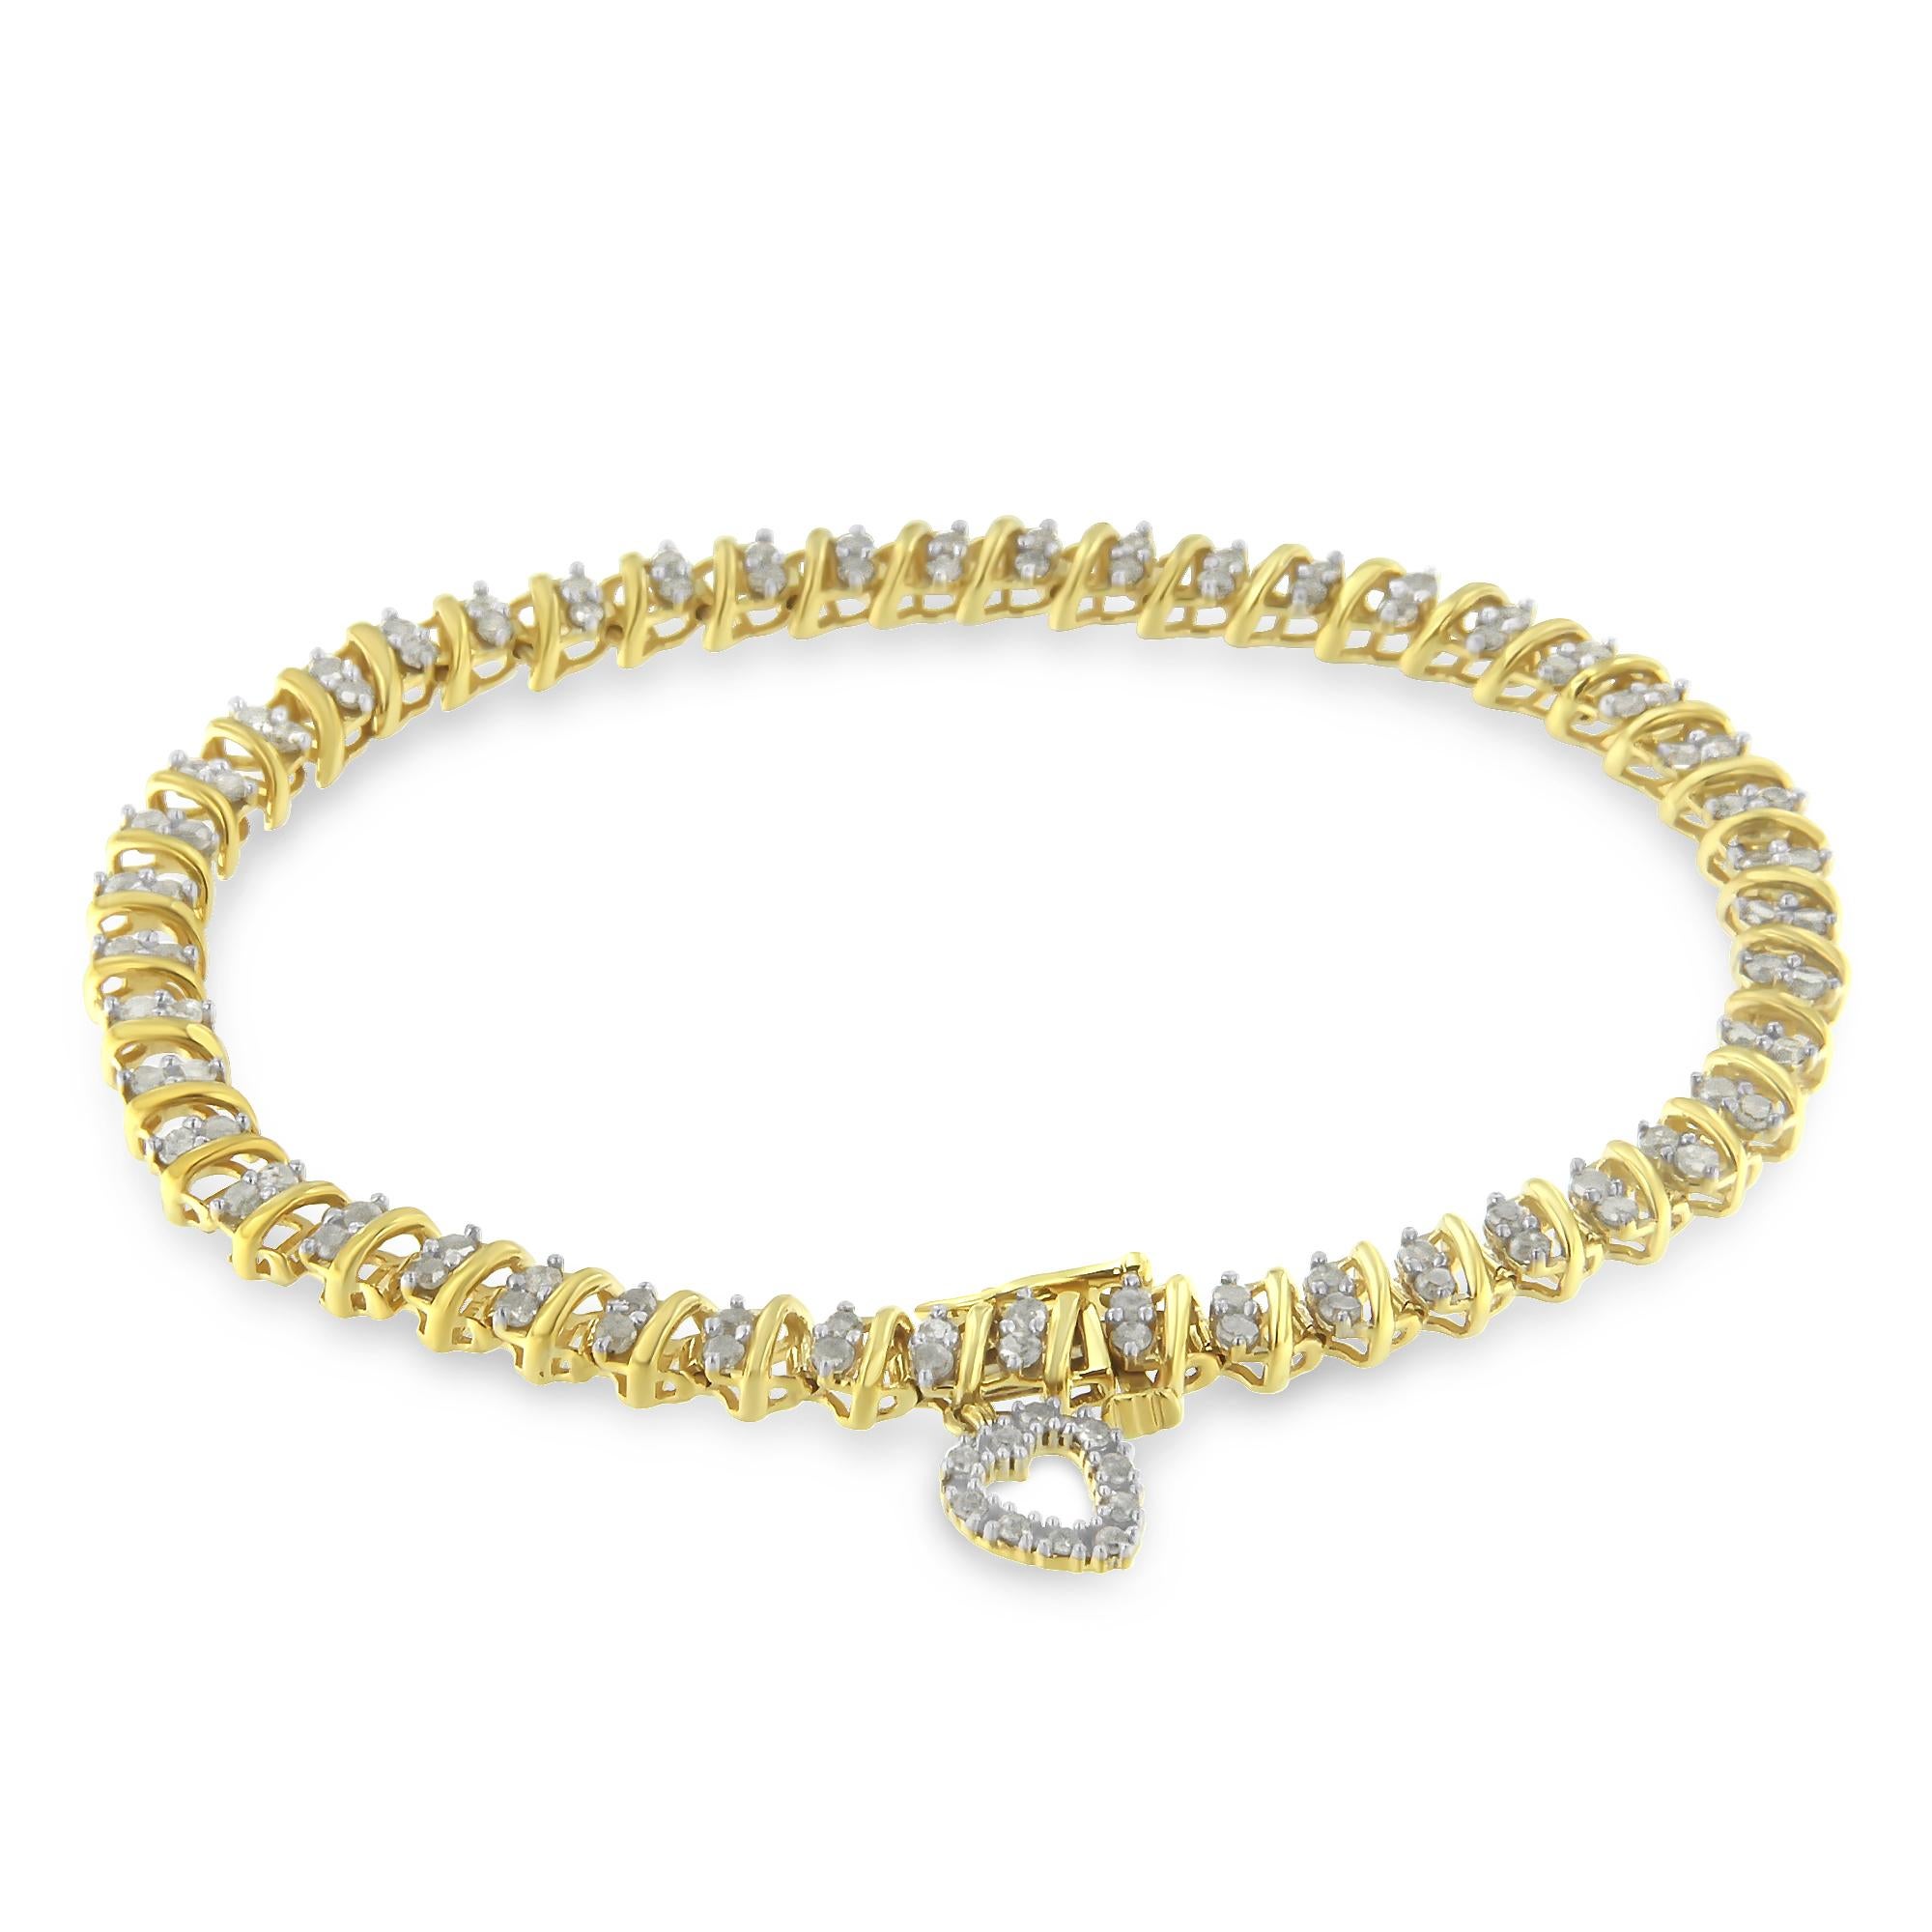 Elegantly crafted from warm, yellow-plated sterling silver, this shimmering tennis bracelet has a dazzling design, rife with 2 carats of sparkling white diamonds. The brilliant bracelet features an alternating pattern of prong-set, round white